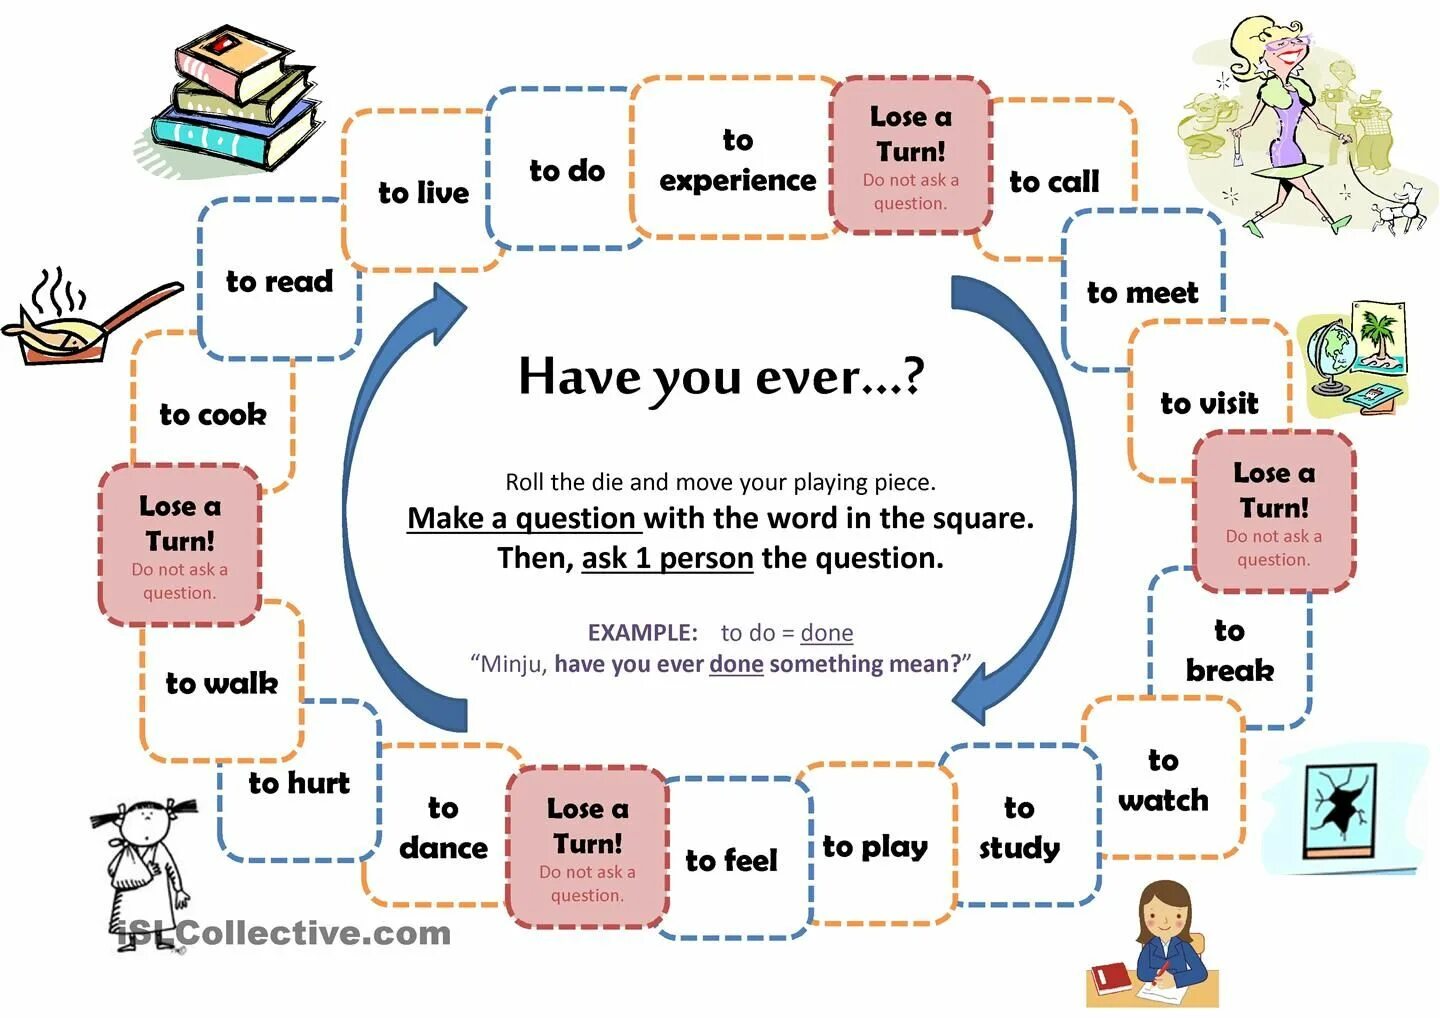 Have you ever been. Present perfect boardgame. Present perfect игра. Игра have you ever. Have you ever Board game.